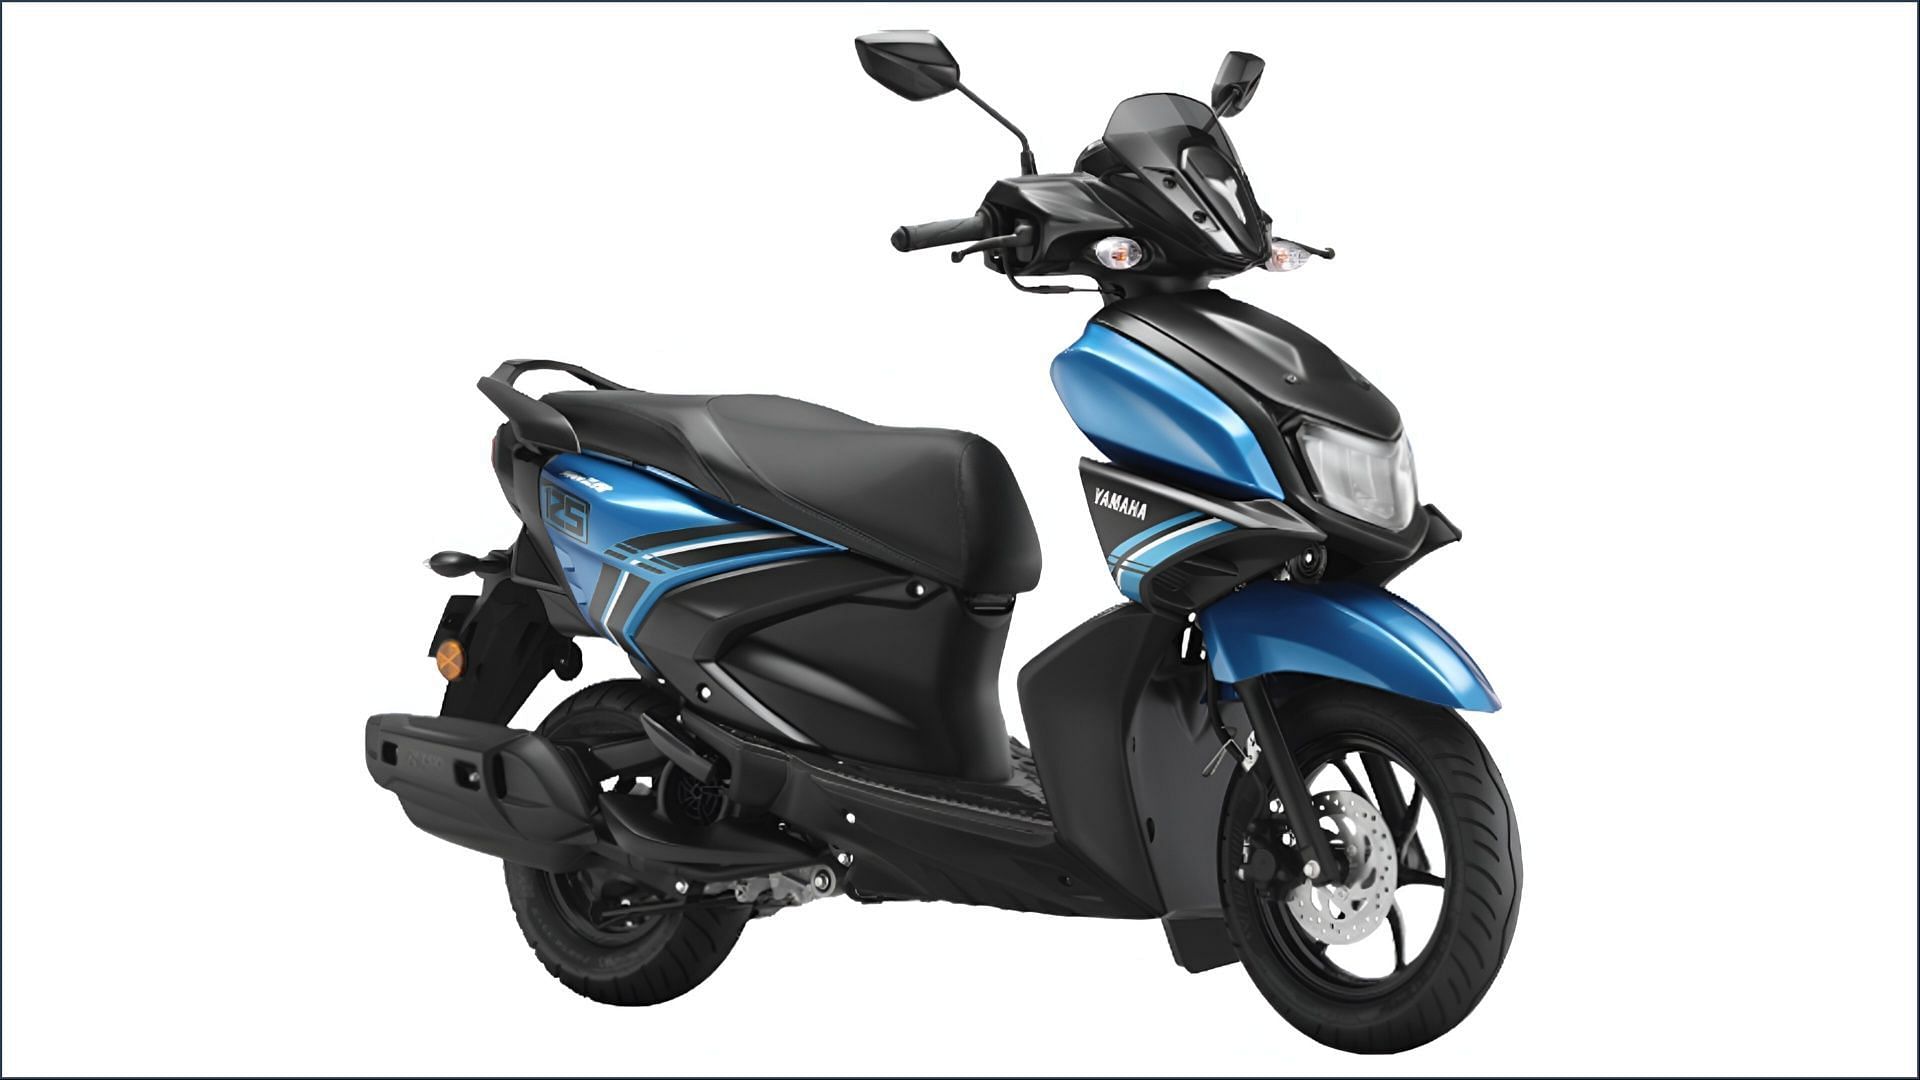 Yamaha recalls 125cc scooters over an issue with the brakes (Image via Yamaha)